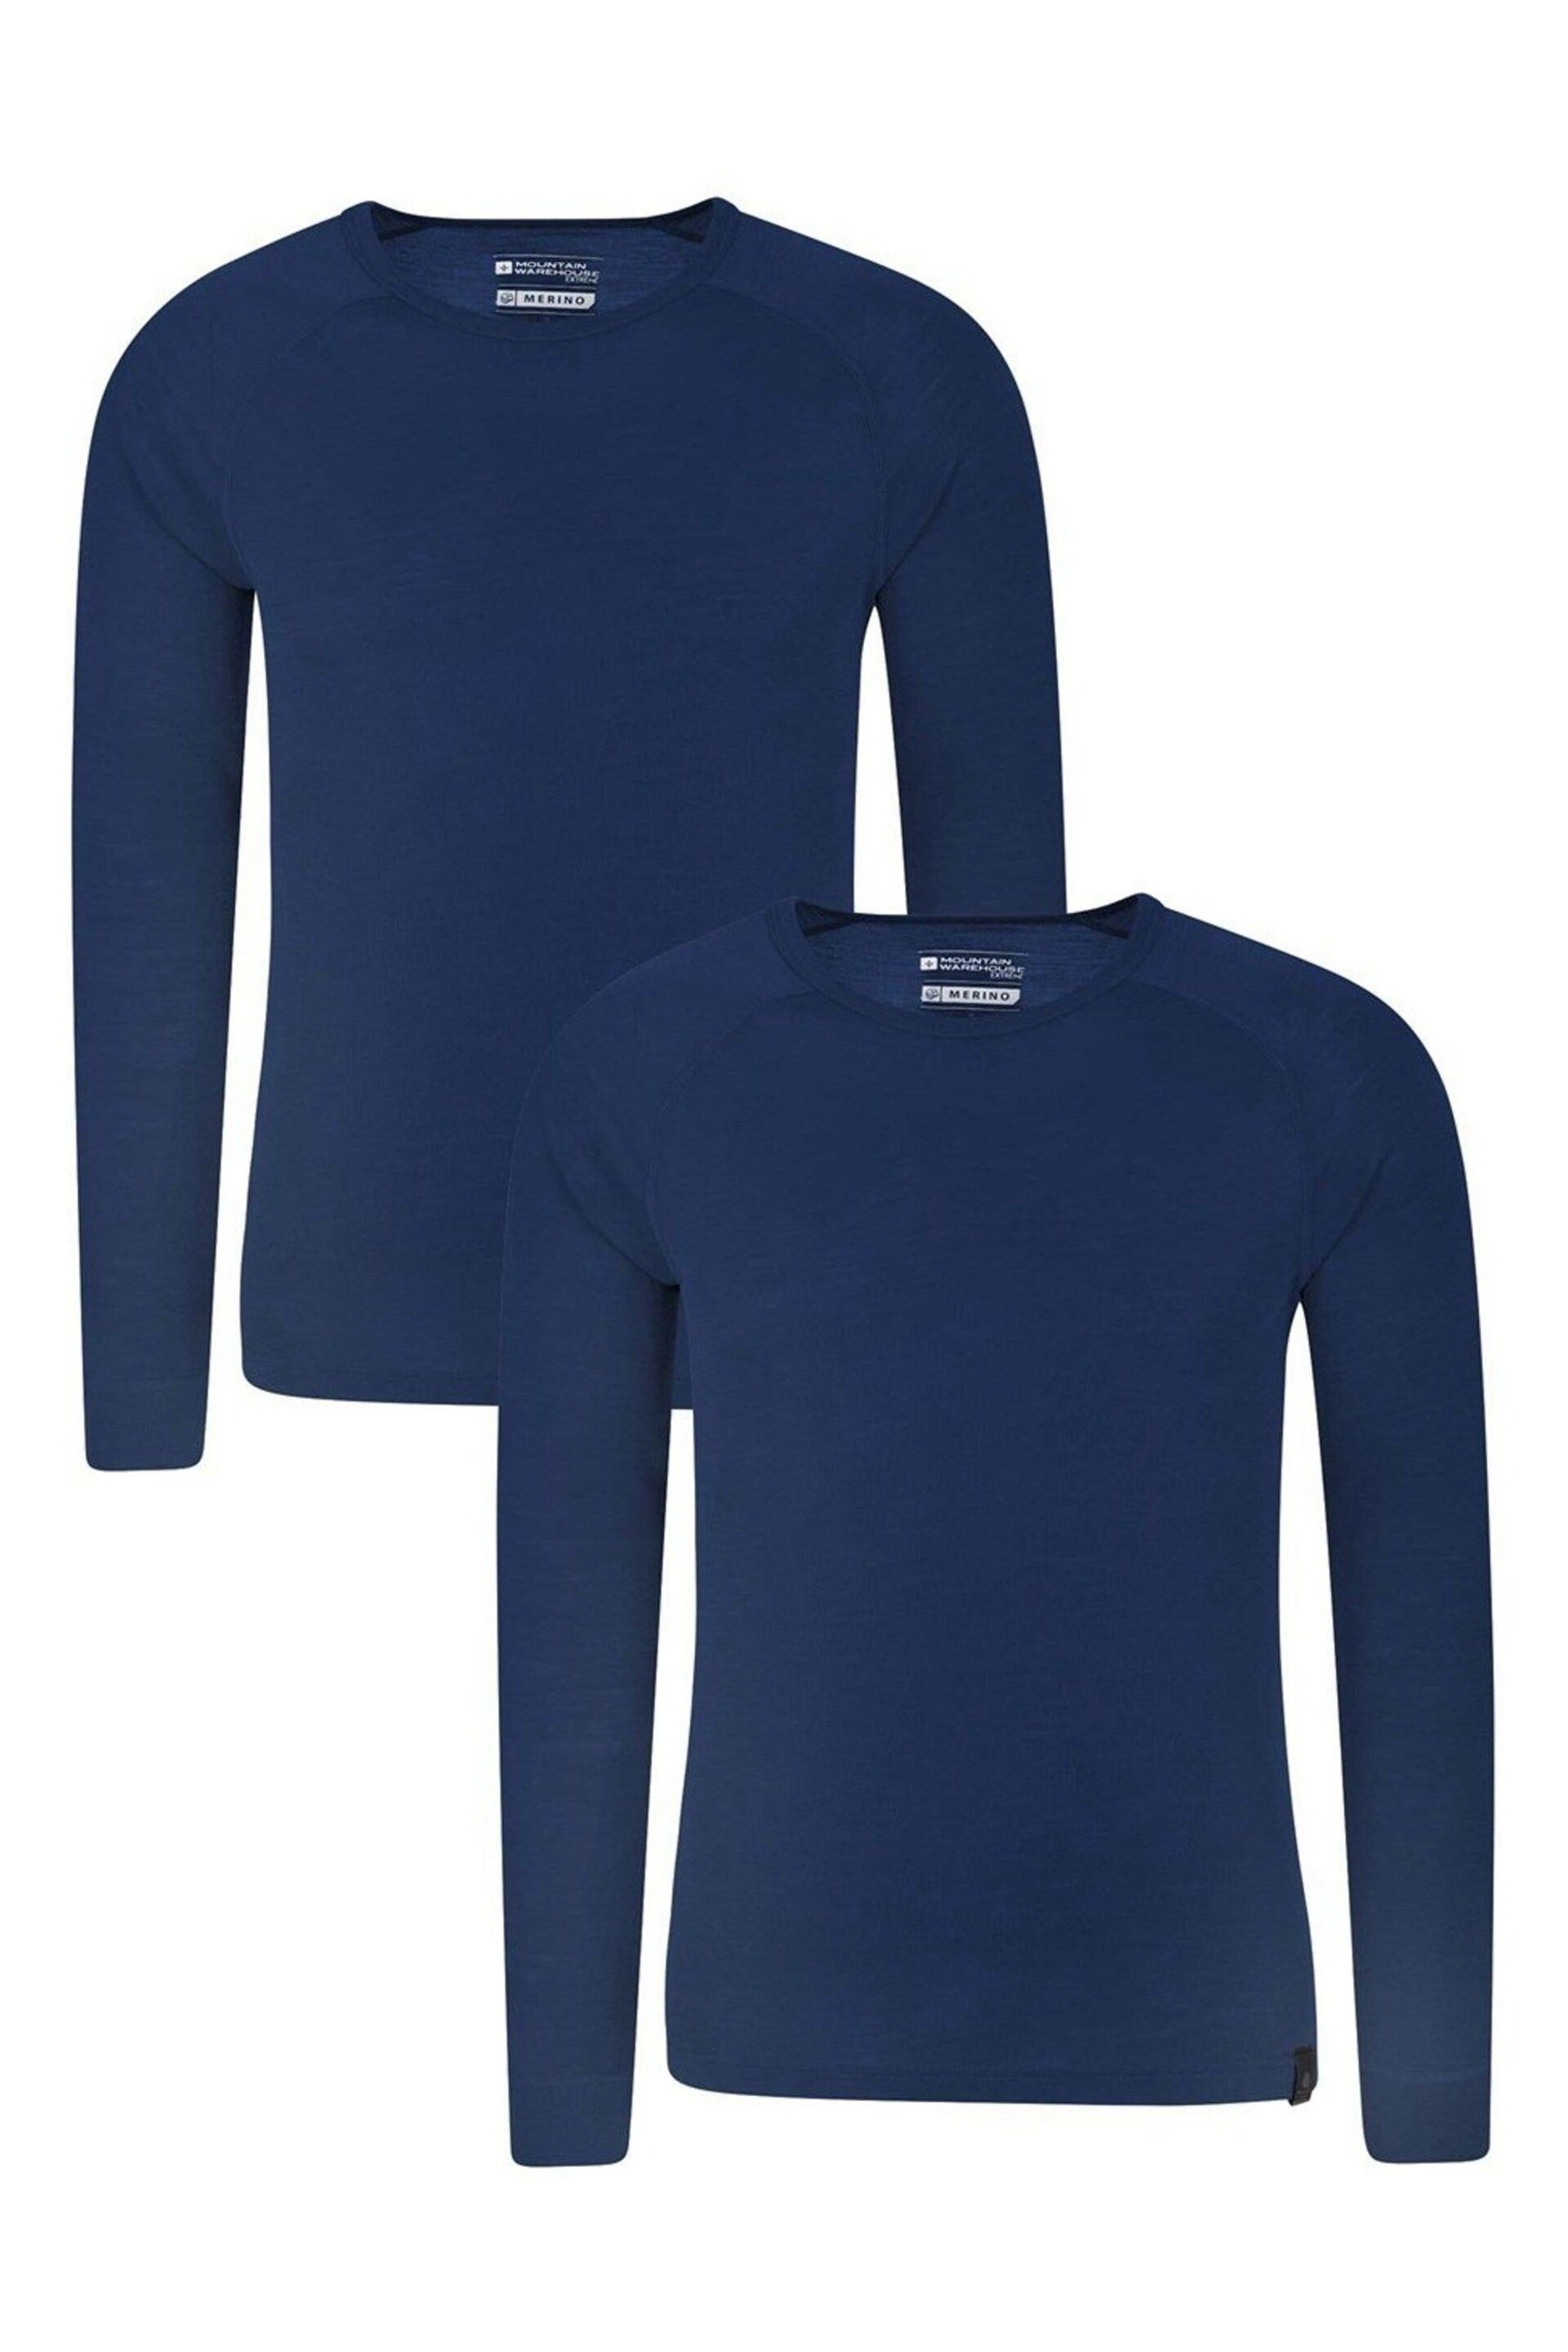 Mountain Warehouse Blue Merino Thermal Top Multipack - Image 1 of 2